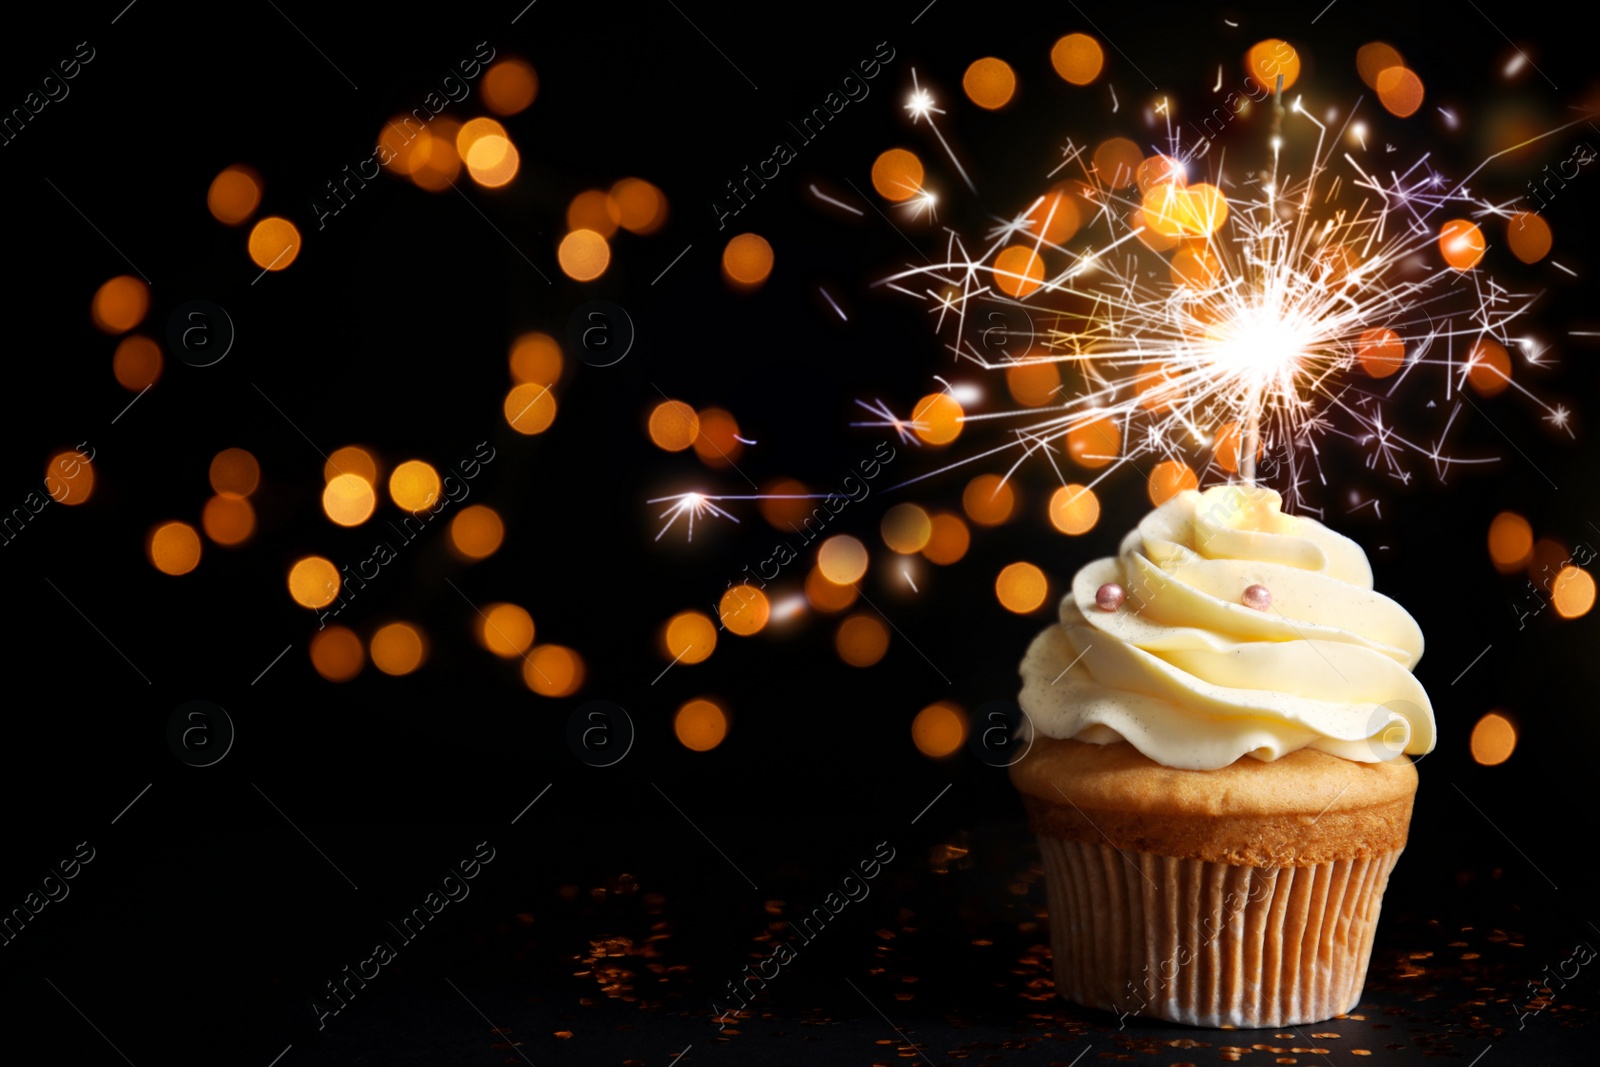 Image of Delicious birthday cupcake with sparkler on black table against blurred lights. Space for text